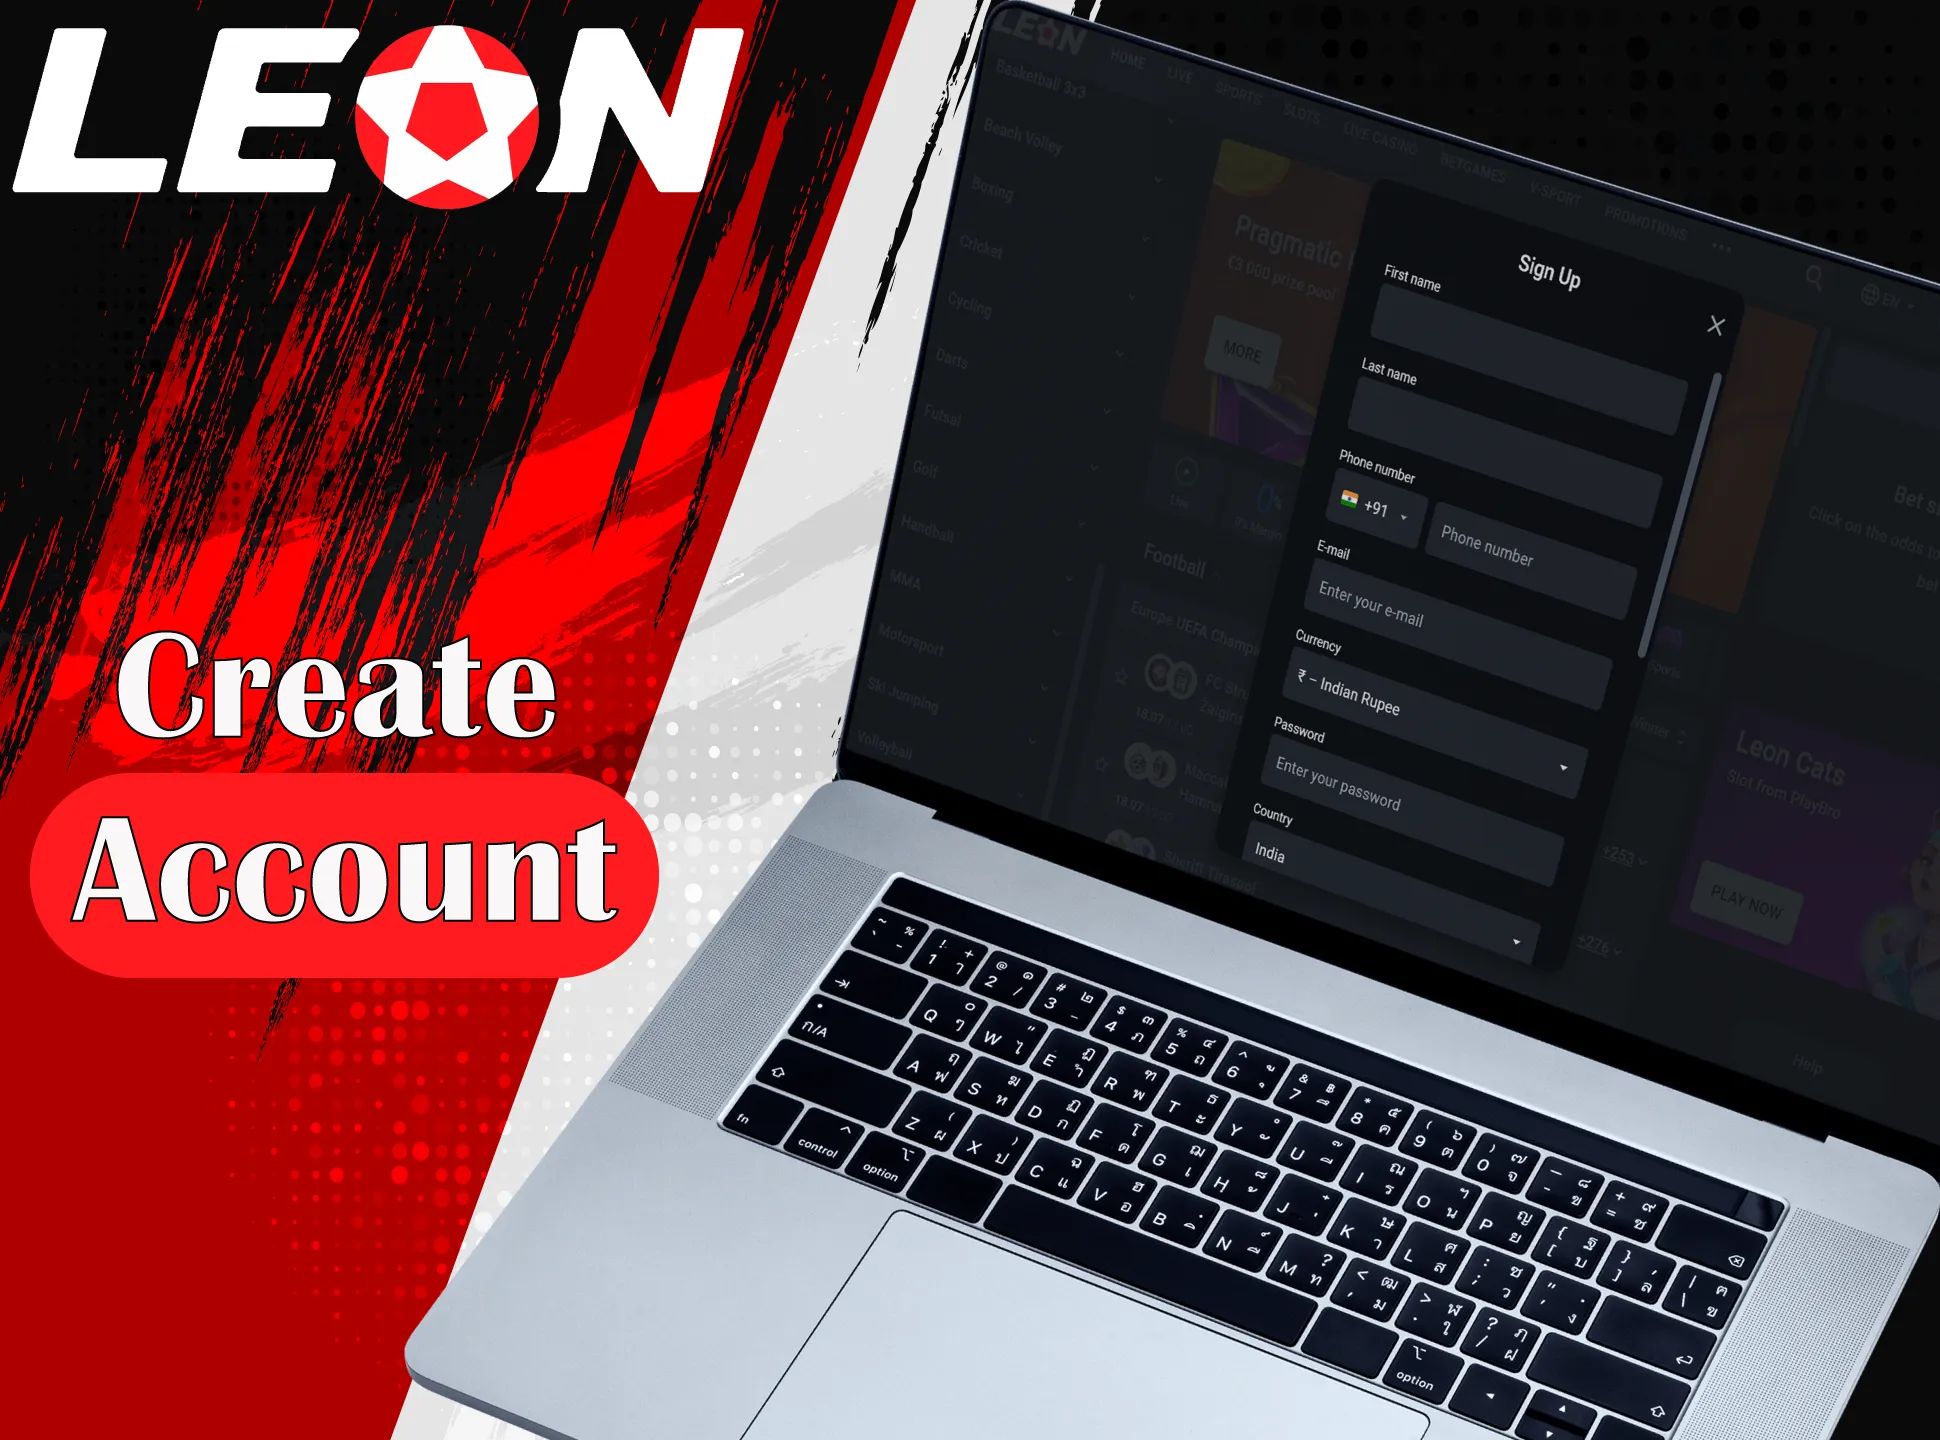 Open the Leonbet officiall website and create your own account.